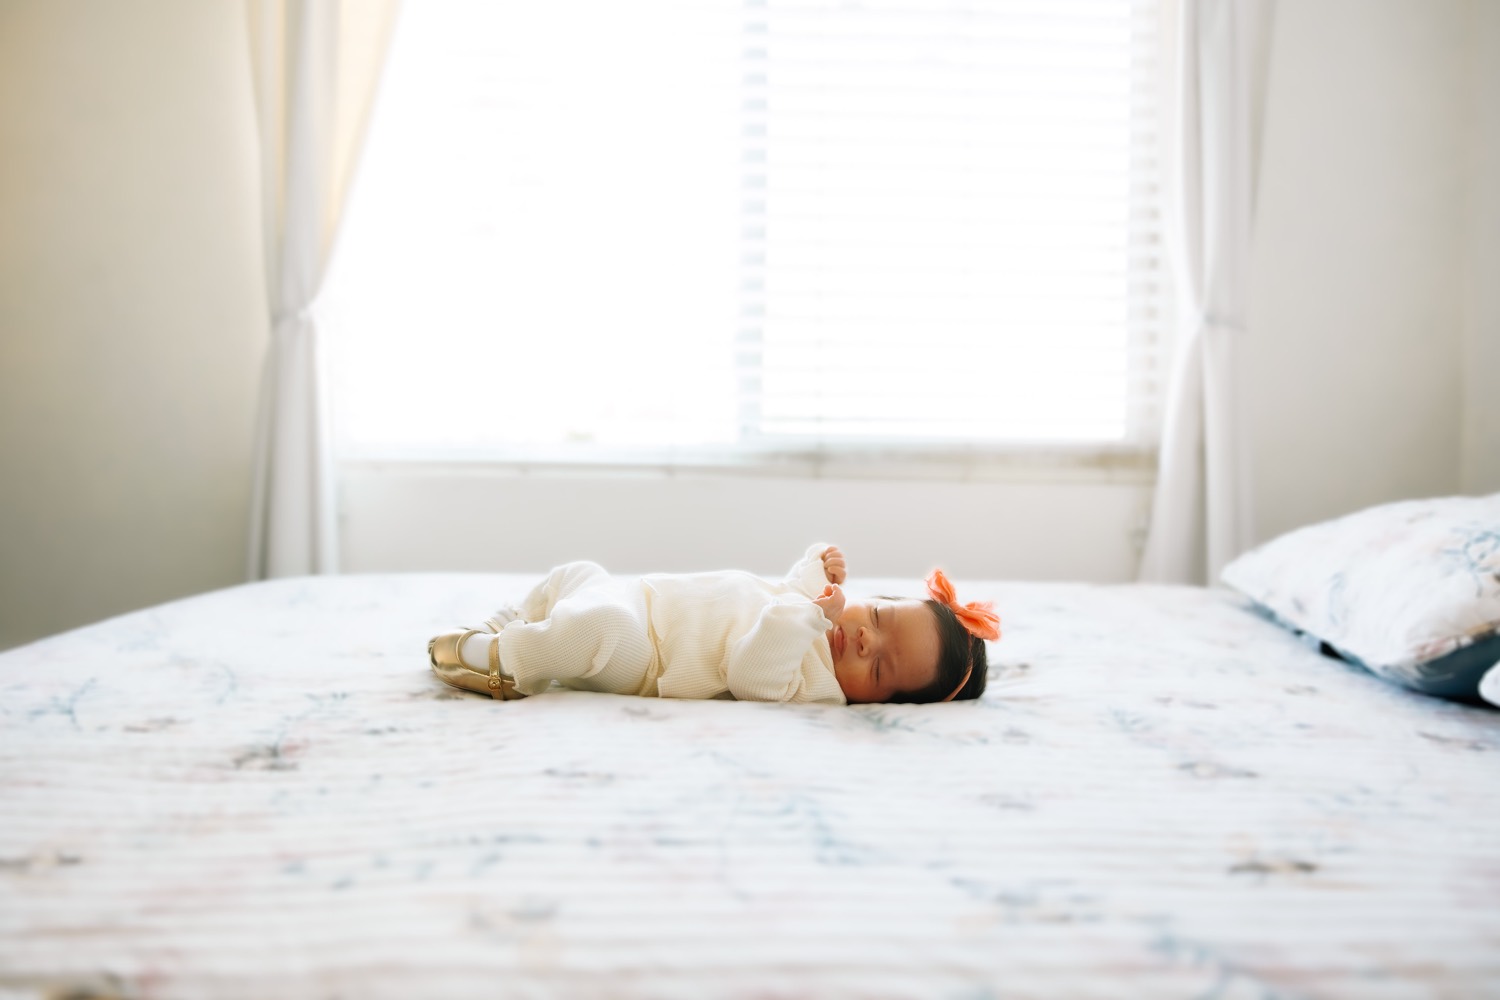 in-home newborn photography session by Magaly Barajas Photo